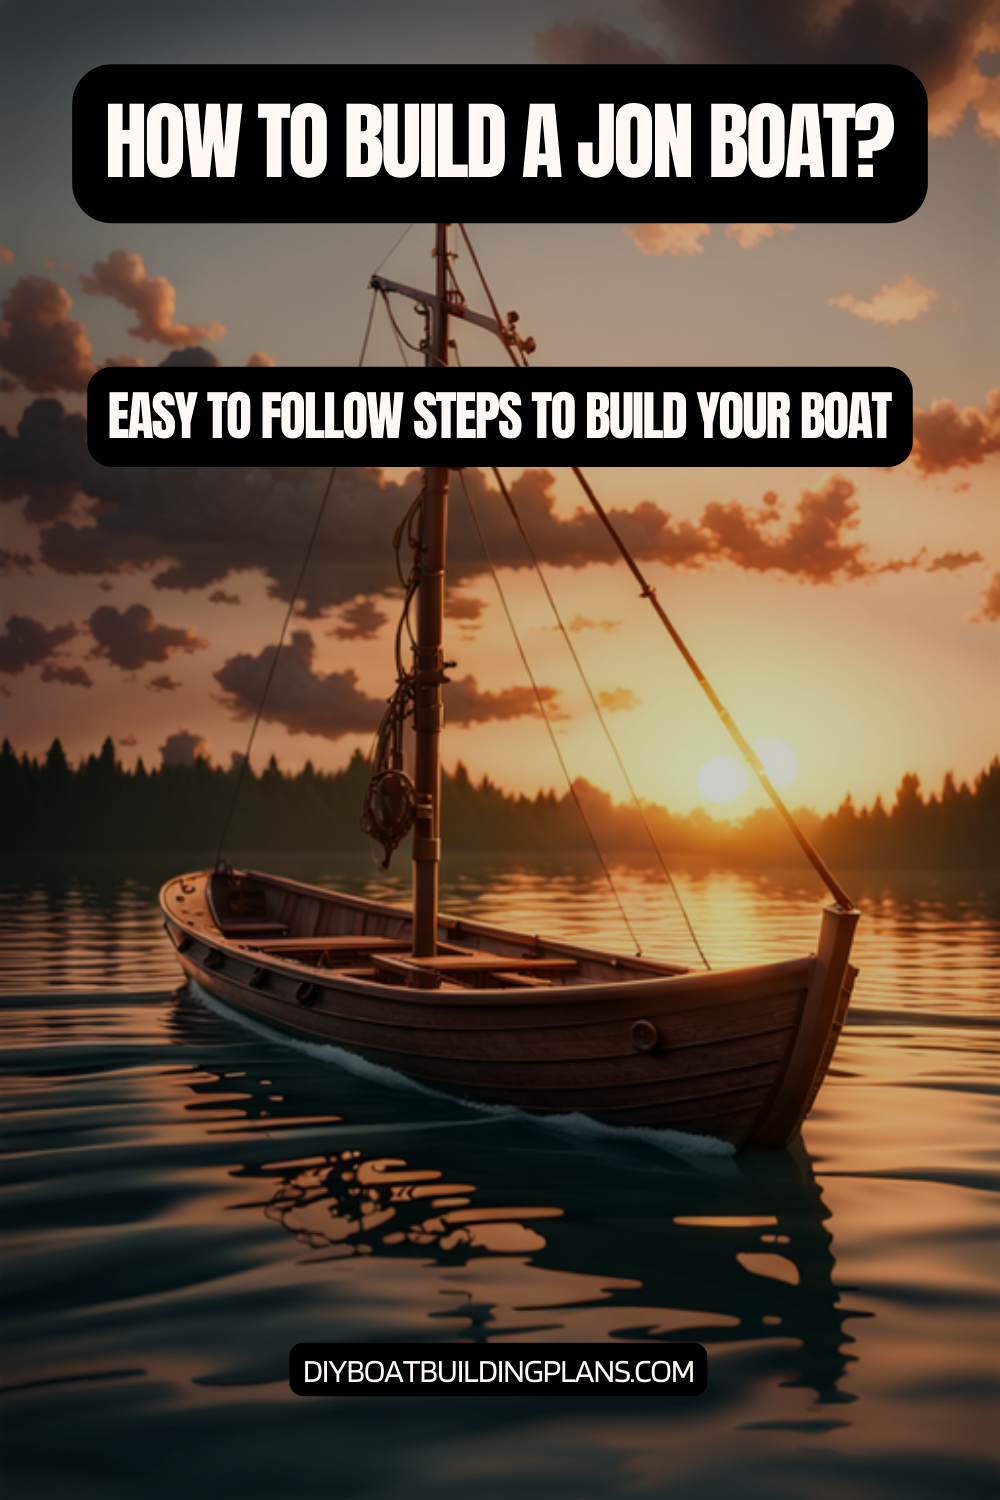 How To Build a Jon Boat